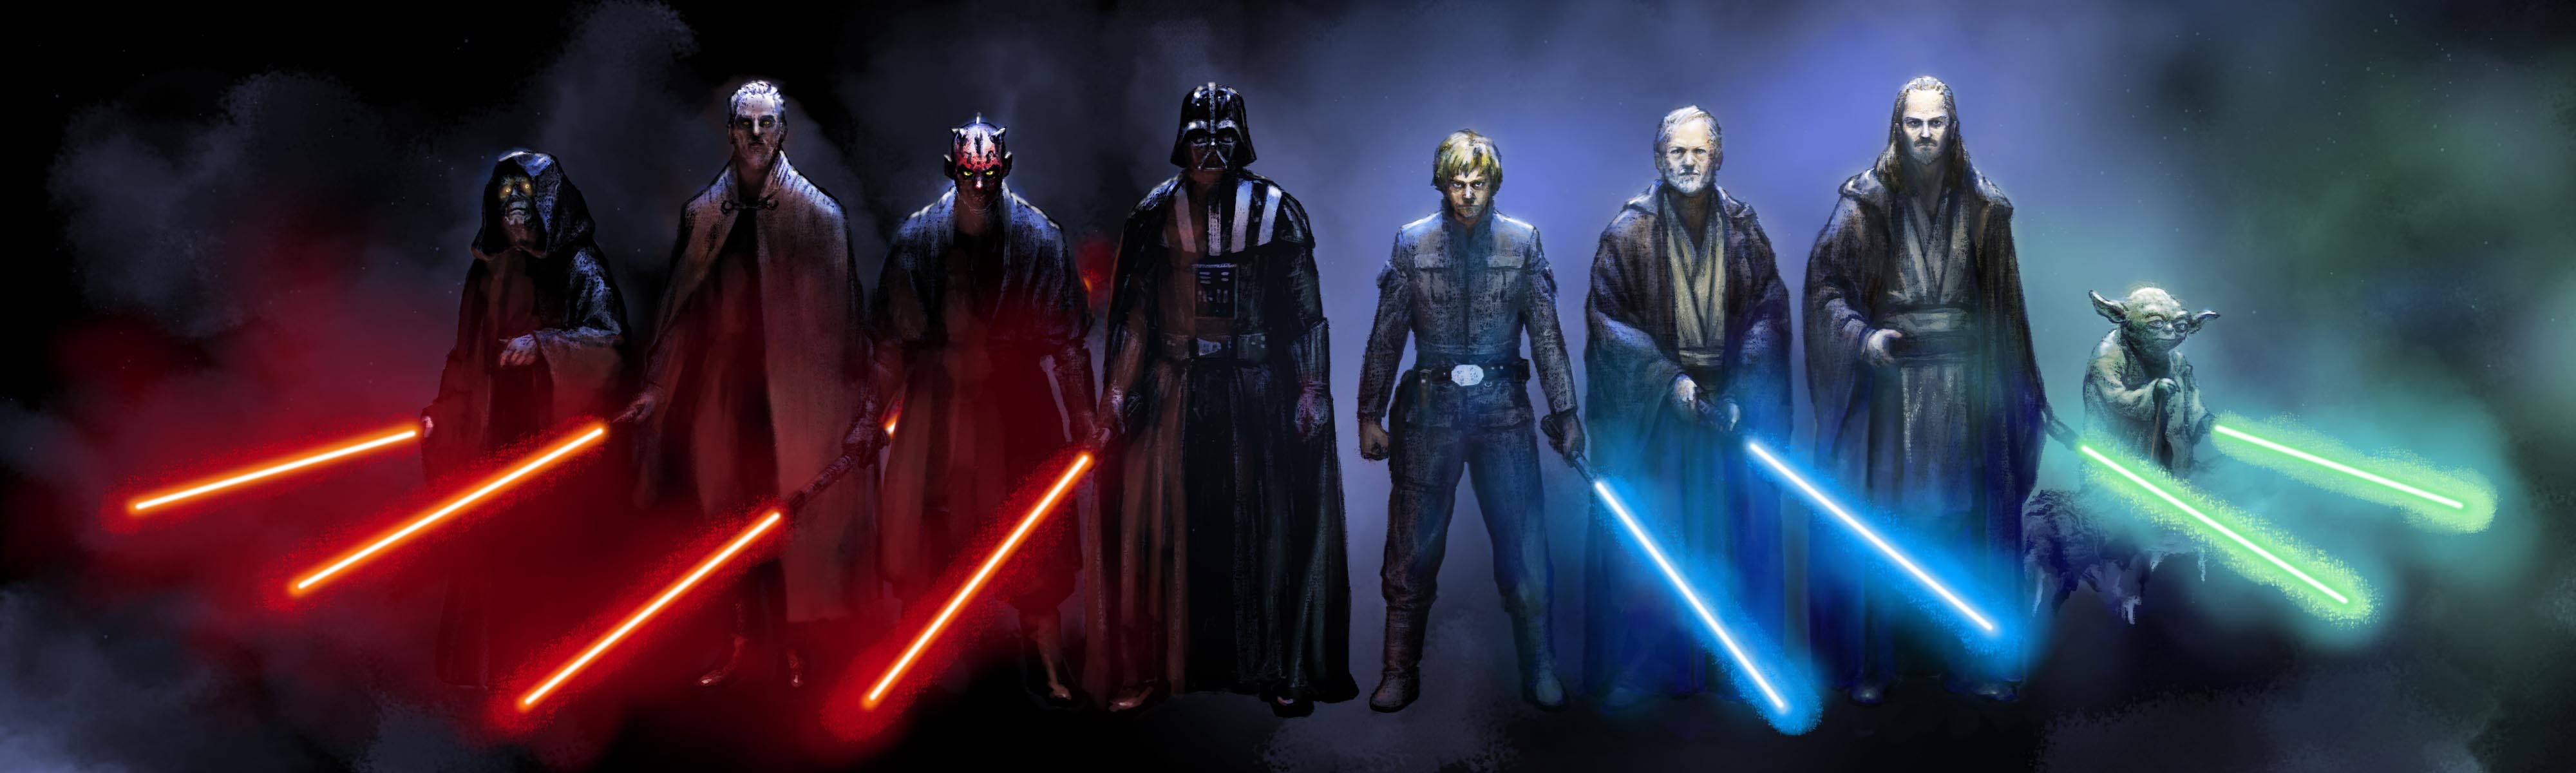  on the way we decided to put together 12 badass Star Wars wallpapers 4000x1200